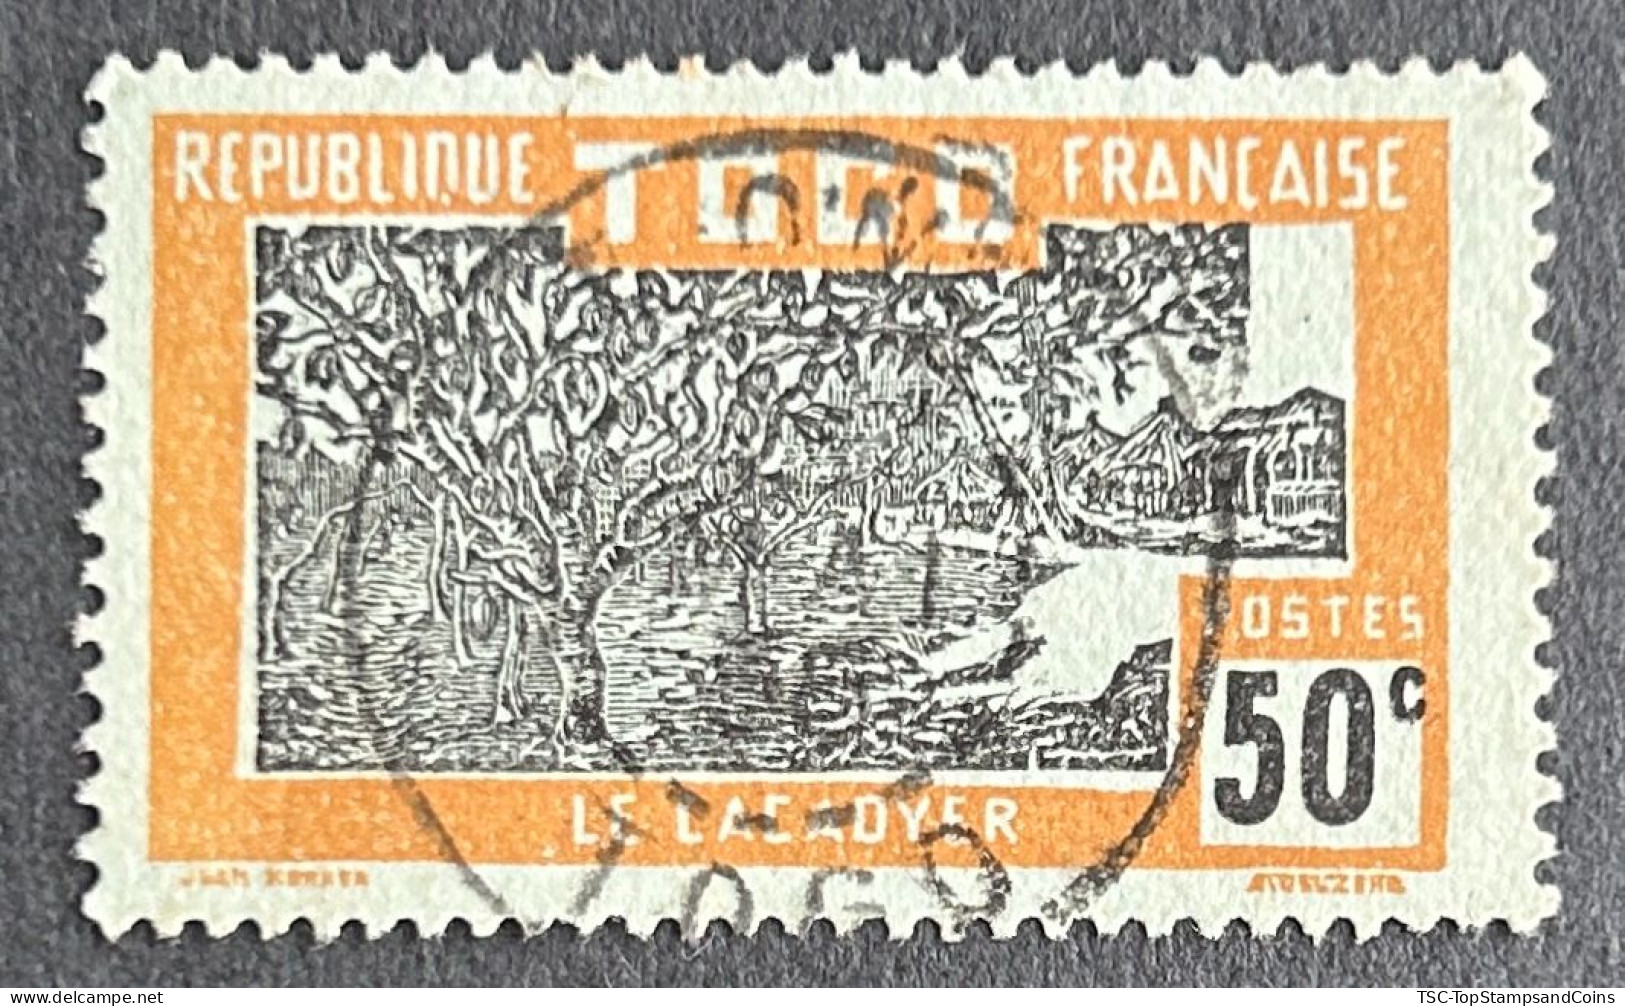 FRTG0136U1 - Agriculture - Cocoa Plantation - 50 C Used Stamp - French Togo - 1924 - Gebraucht